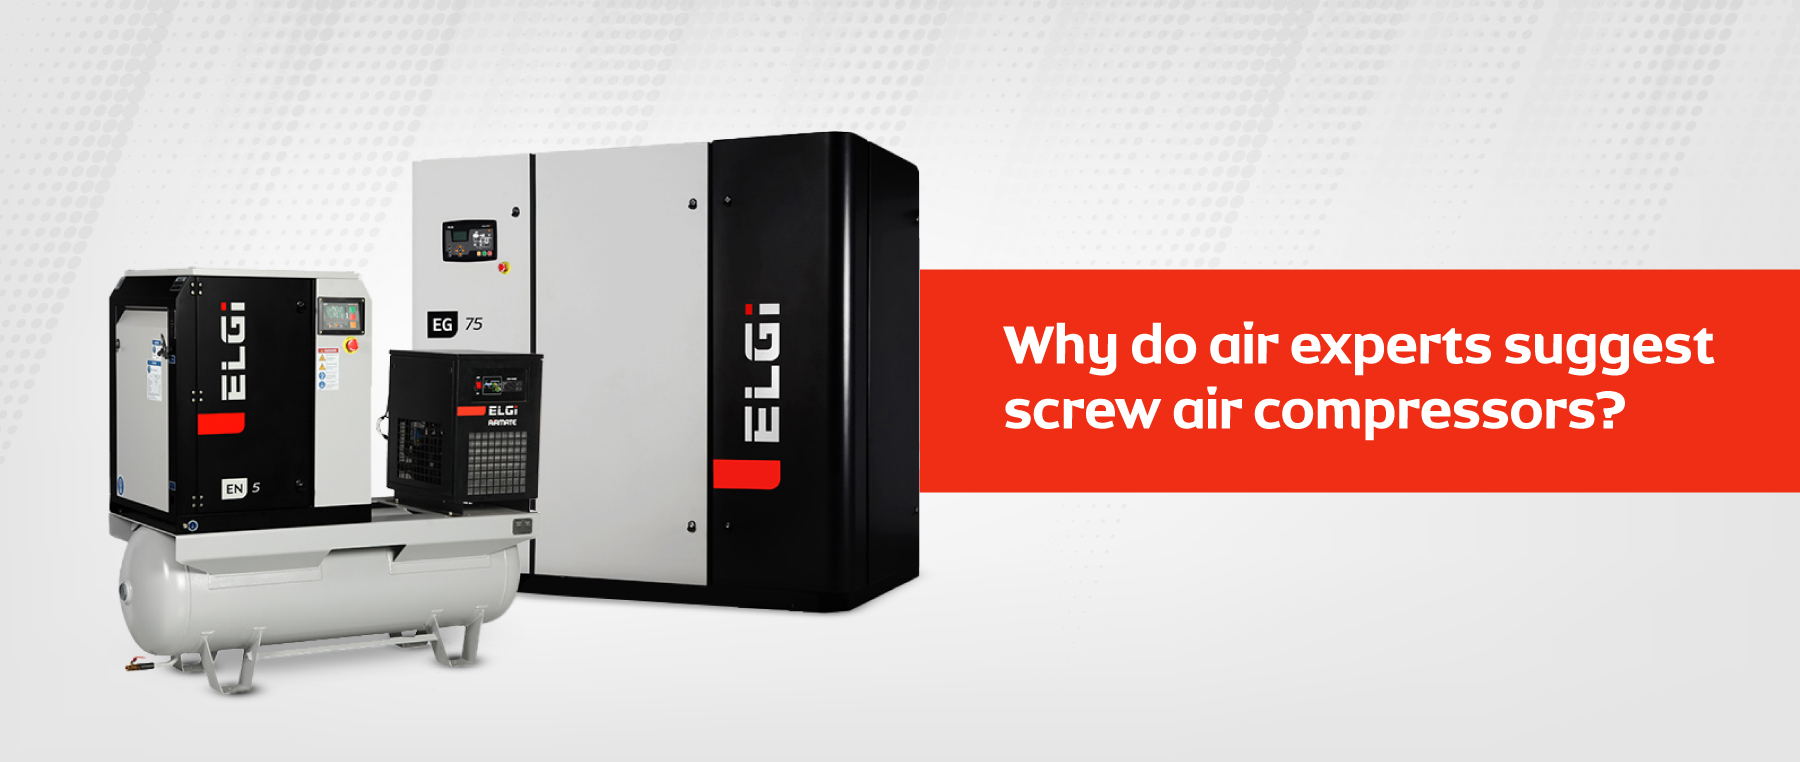 What Makes Screw Air Compressors the Preferred Choice for Air Experts?